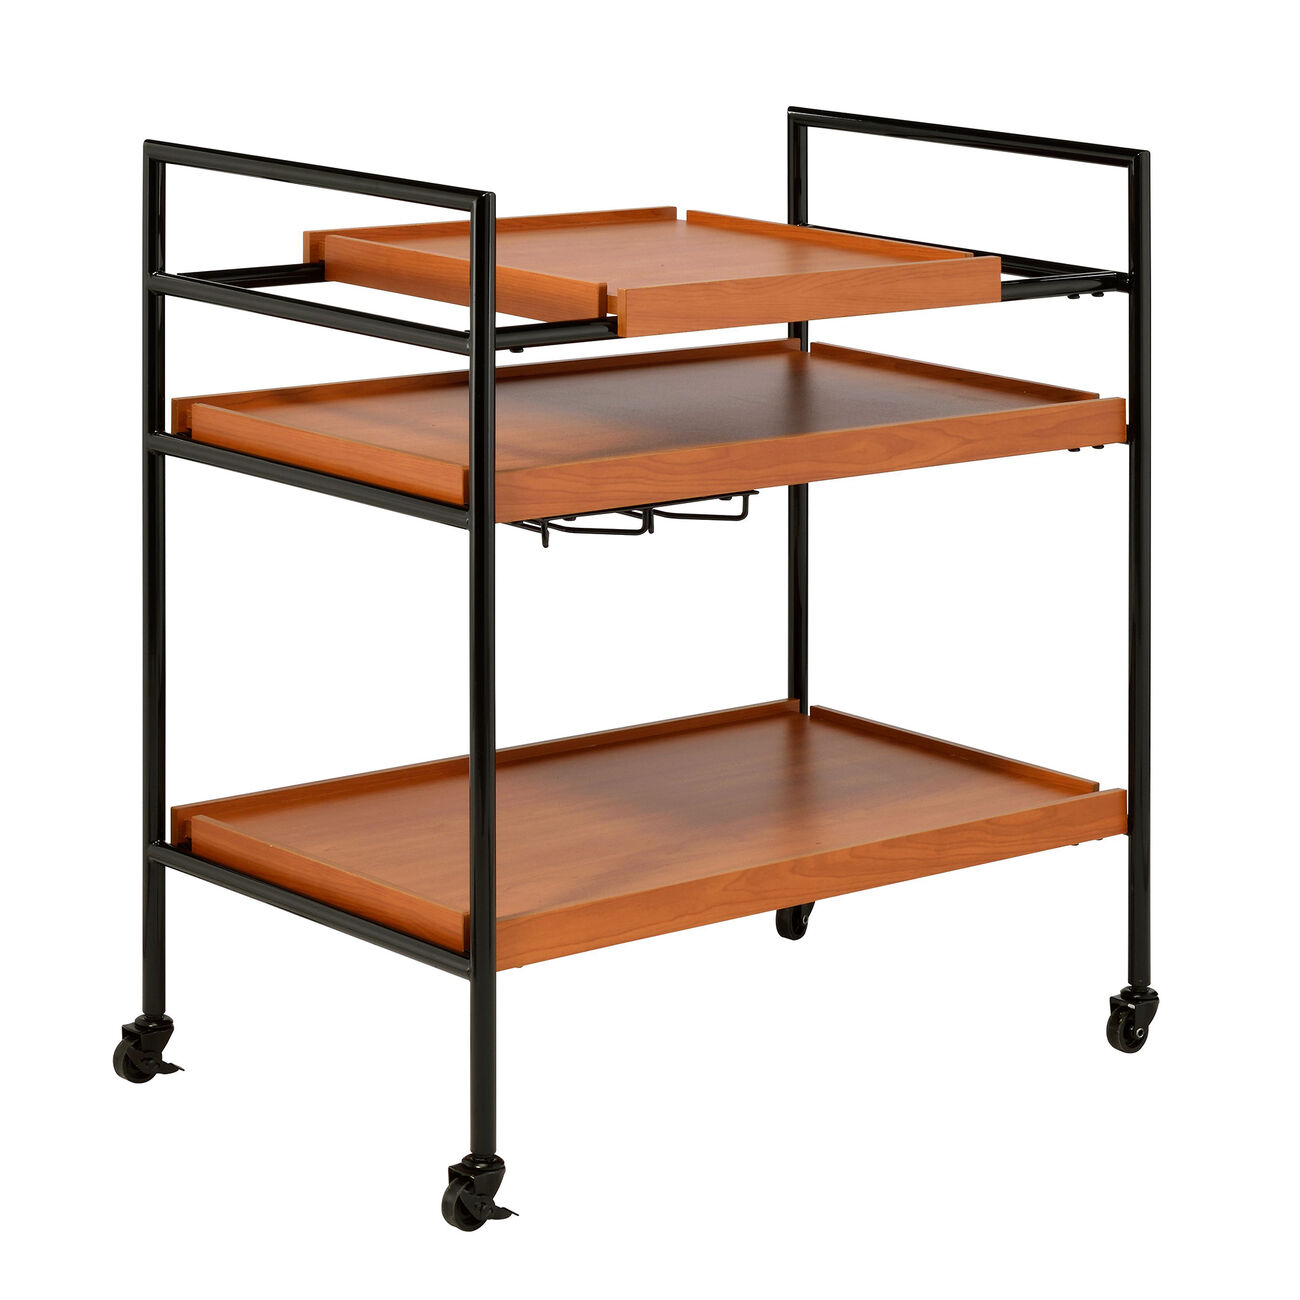 Metal Frame Serving Cart with Adjustable Compartments, Oak Brown and Black